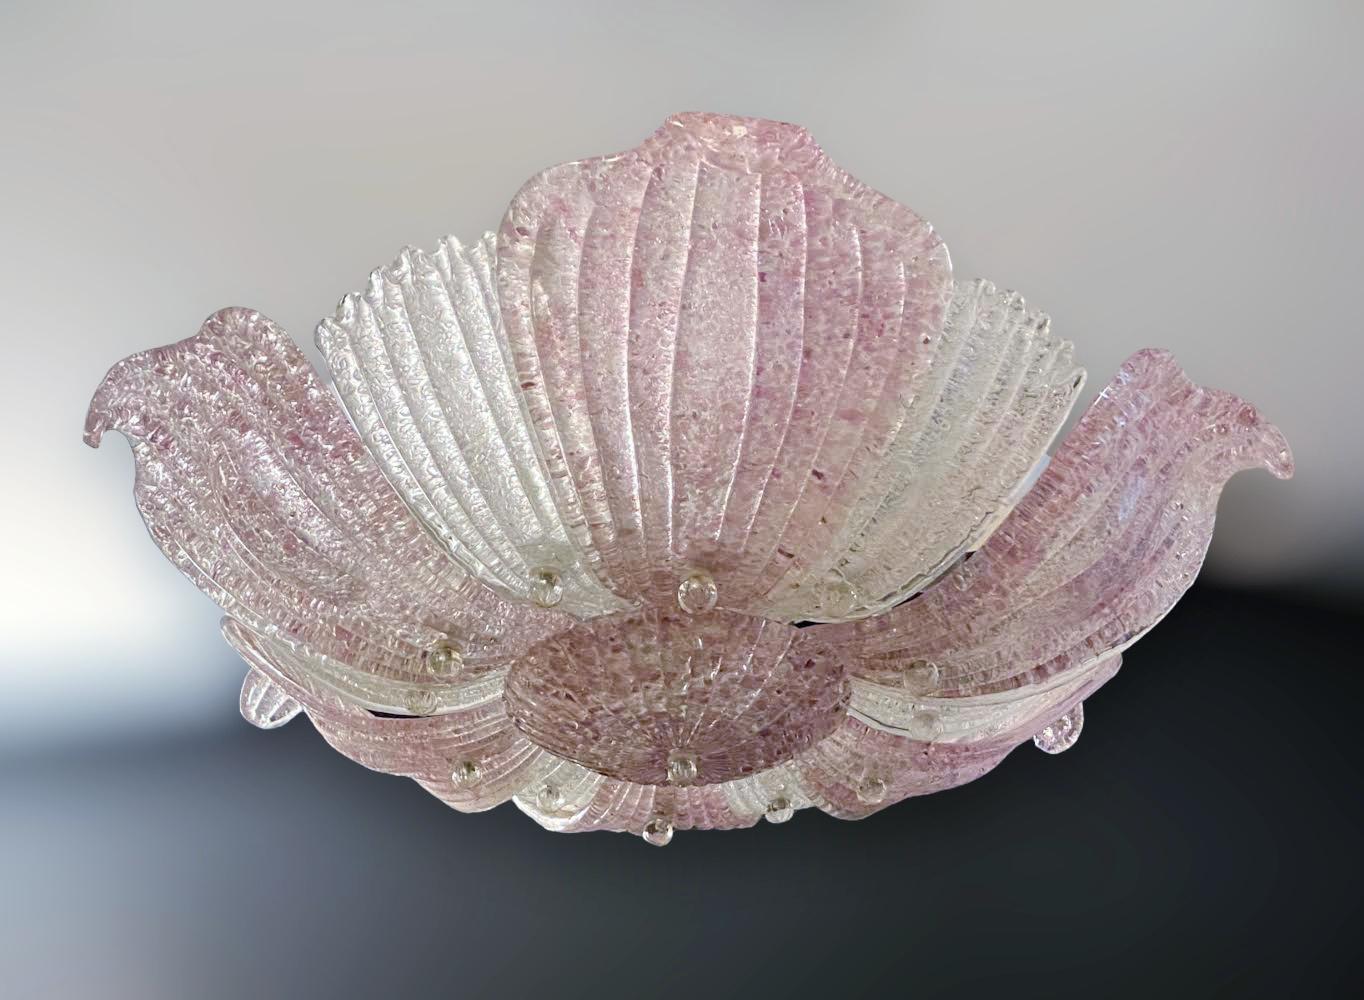 Vintage Italian Murano glass flush mount with clear and amethyst graniglia glass leaves on white metal frame / Made in Italy in the style of Barovier e Toso, circa 1960s
4 lights / E26 or E27 type / max 60W each
Measures: Diameter 29 inches, height